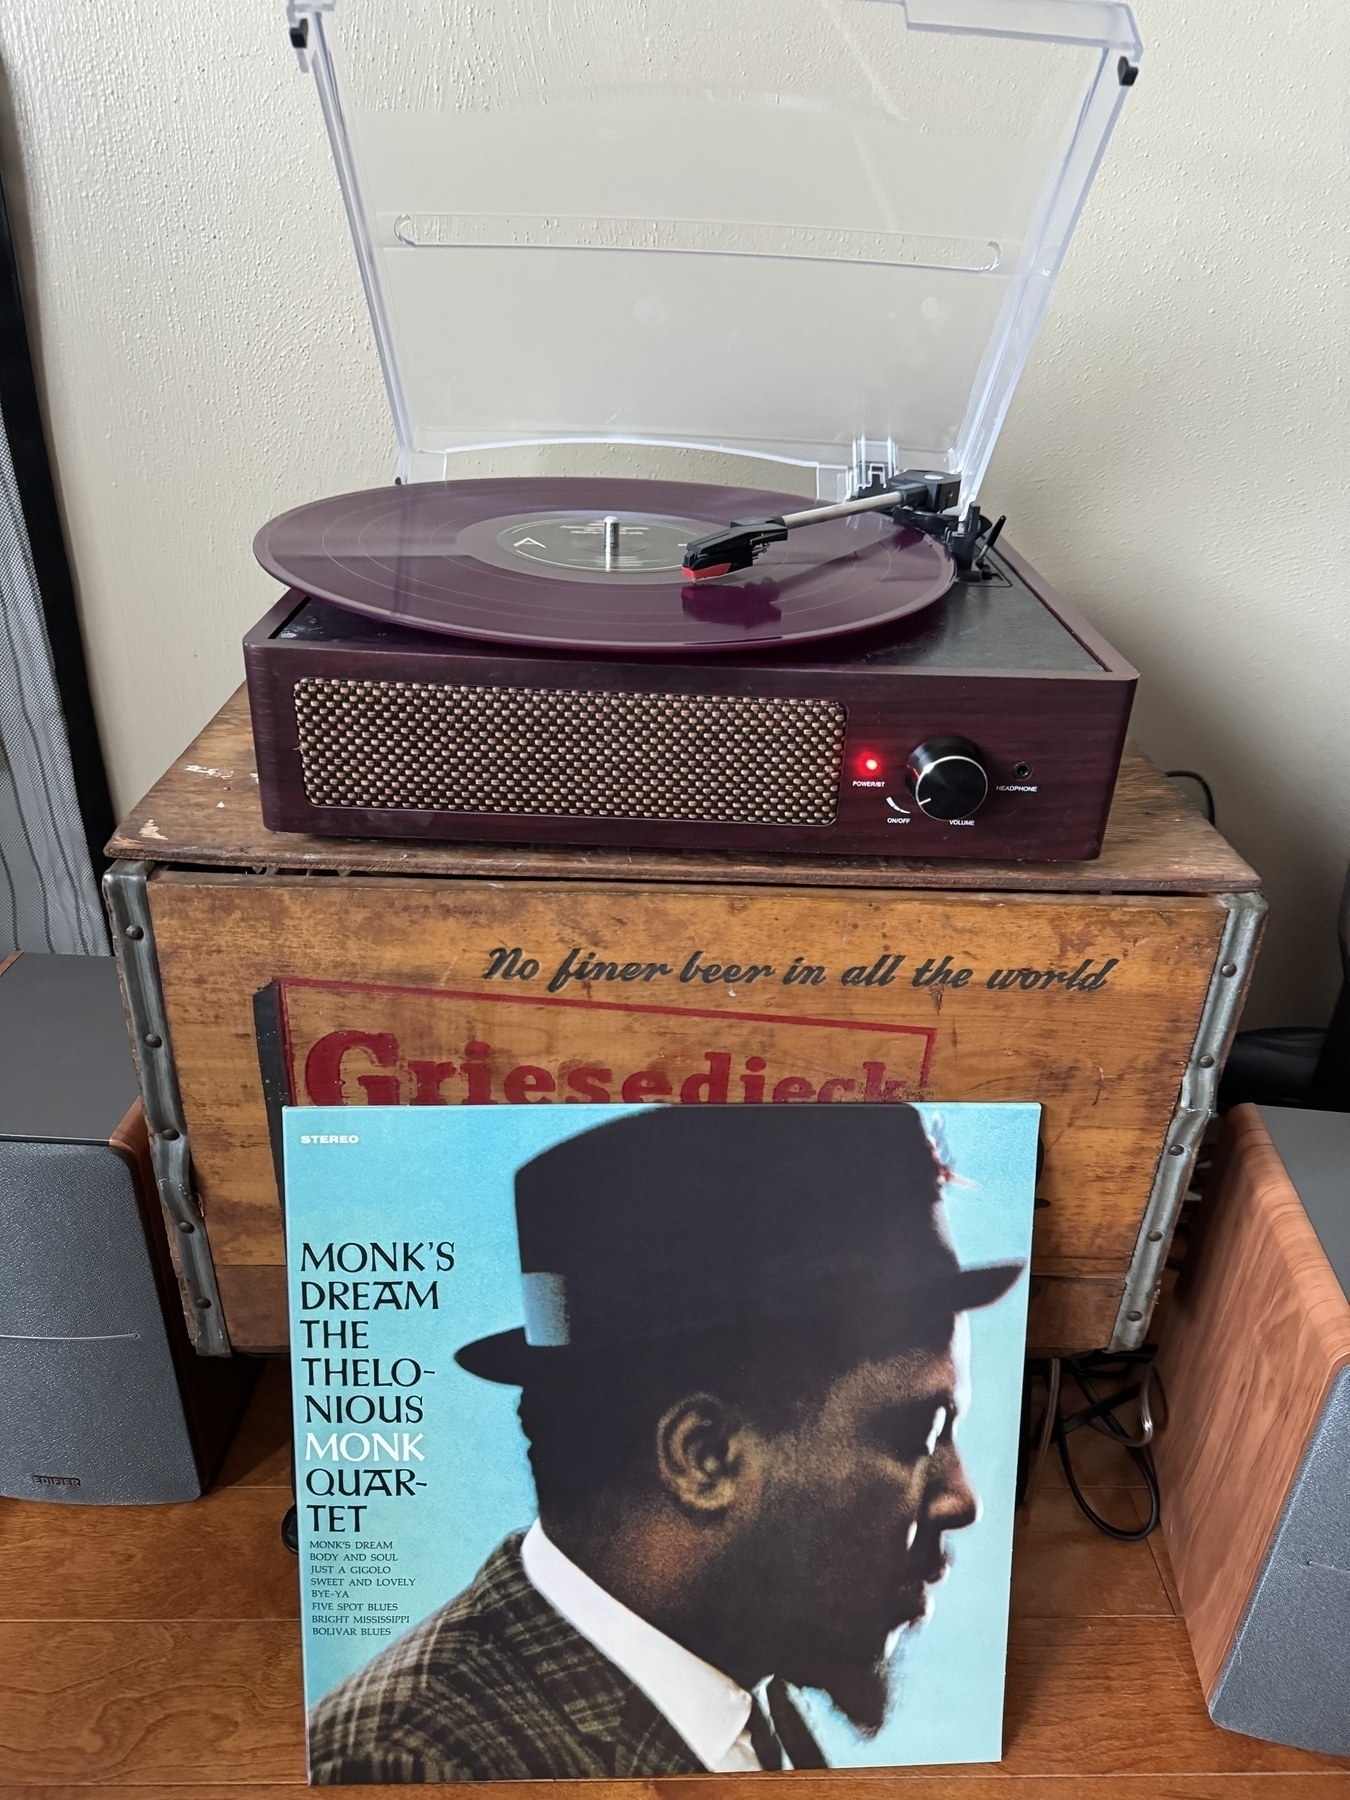 Thelonious Monk’s album Monk’s Dream on vinyl playing on a record player. 